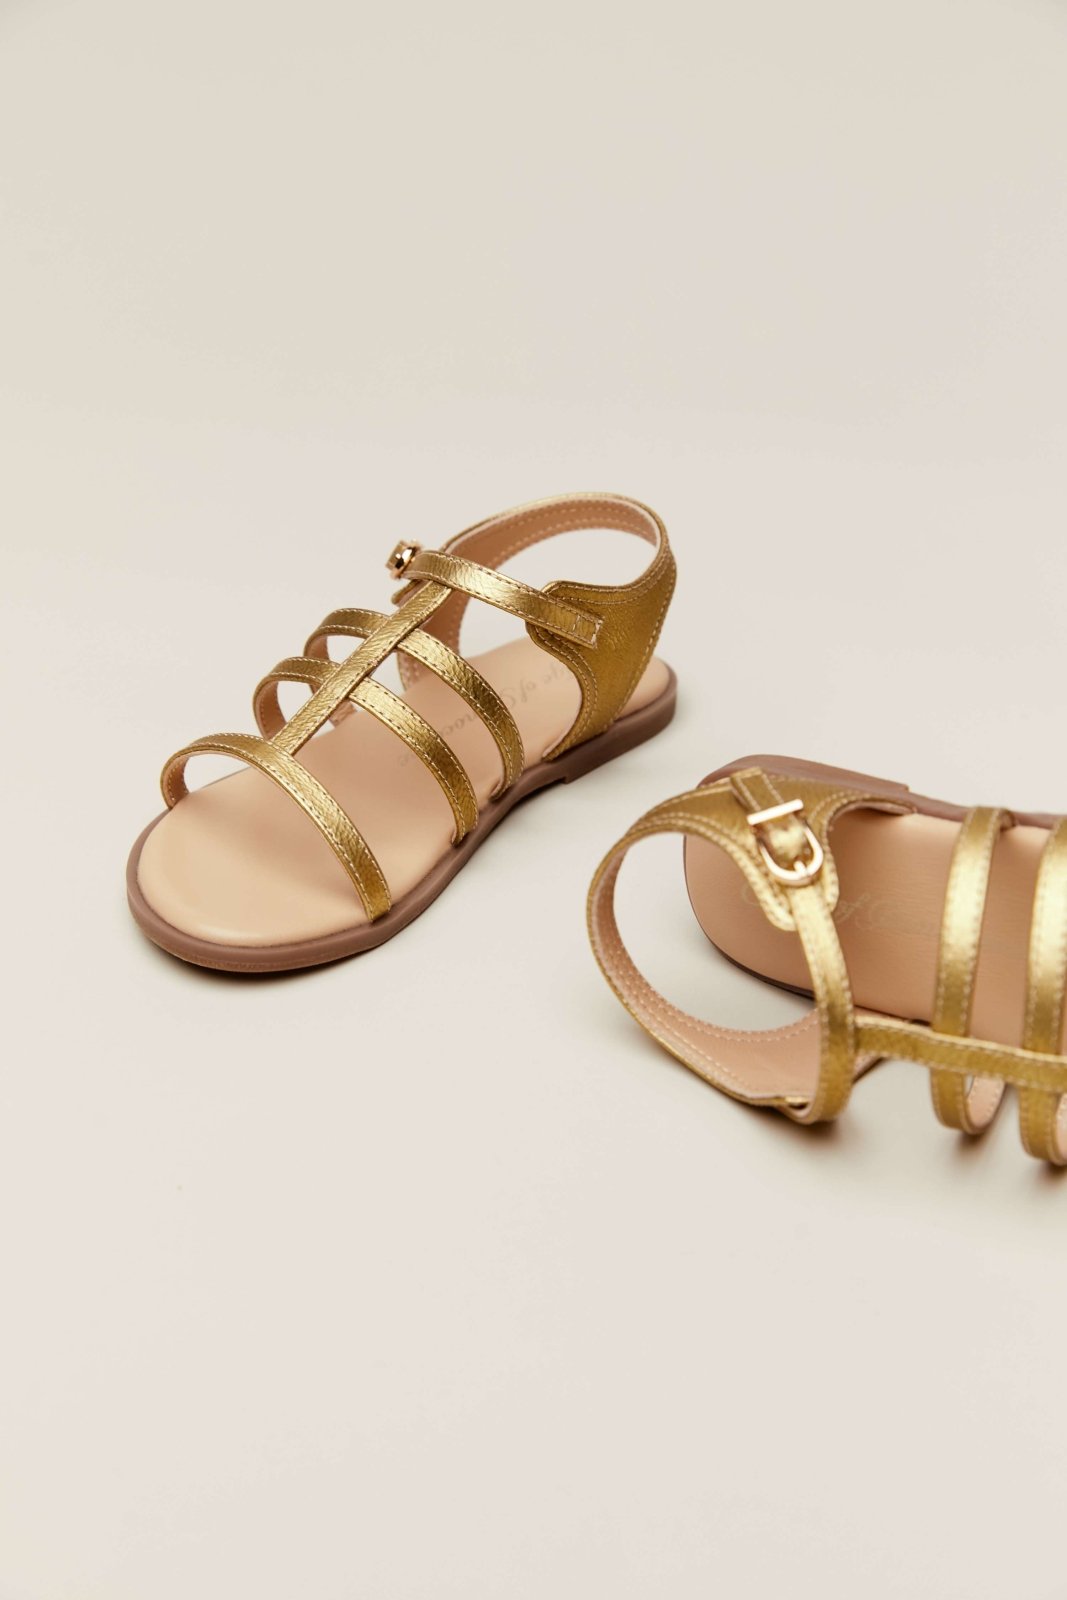 Effie Gold Sandals by Age of Innocence